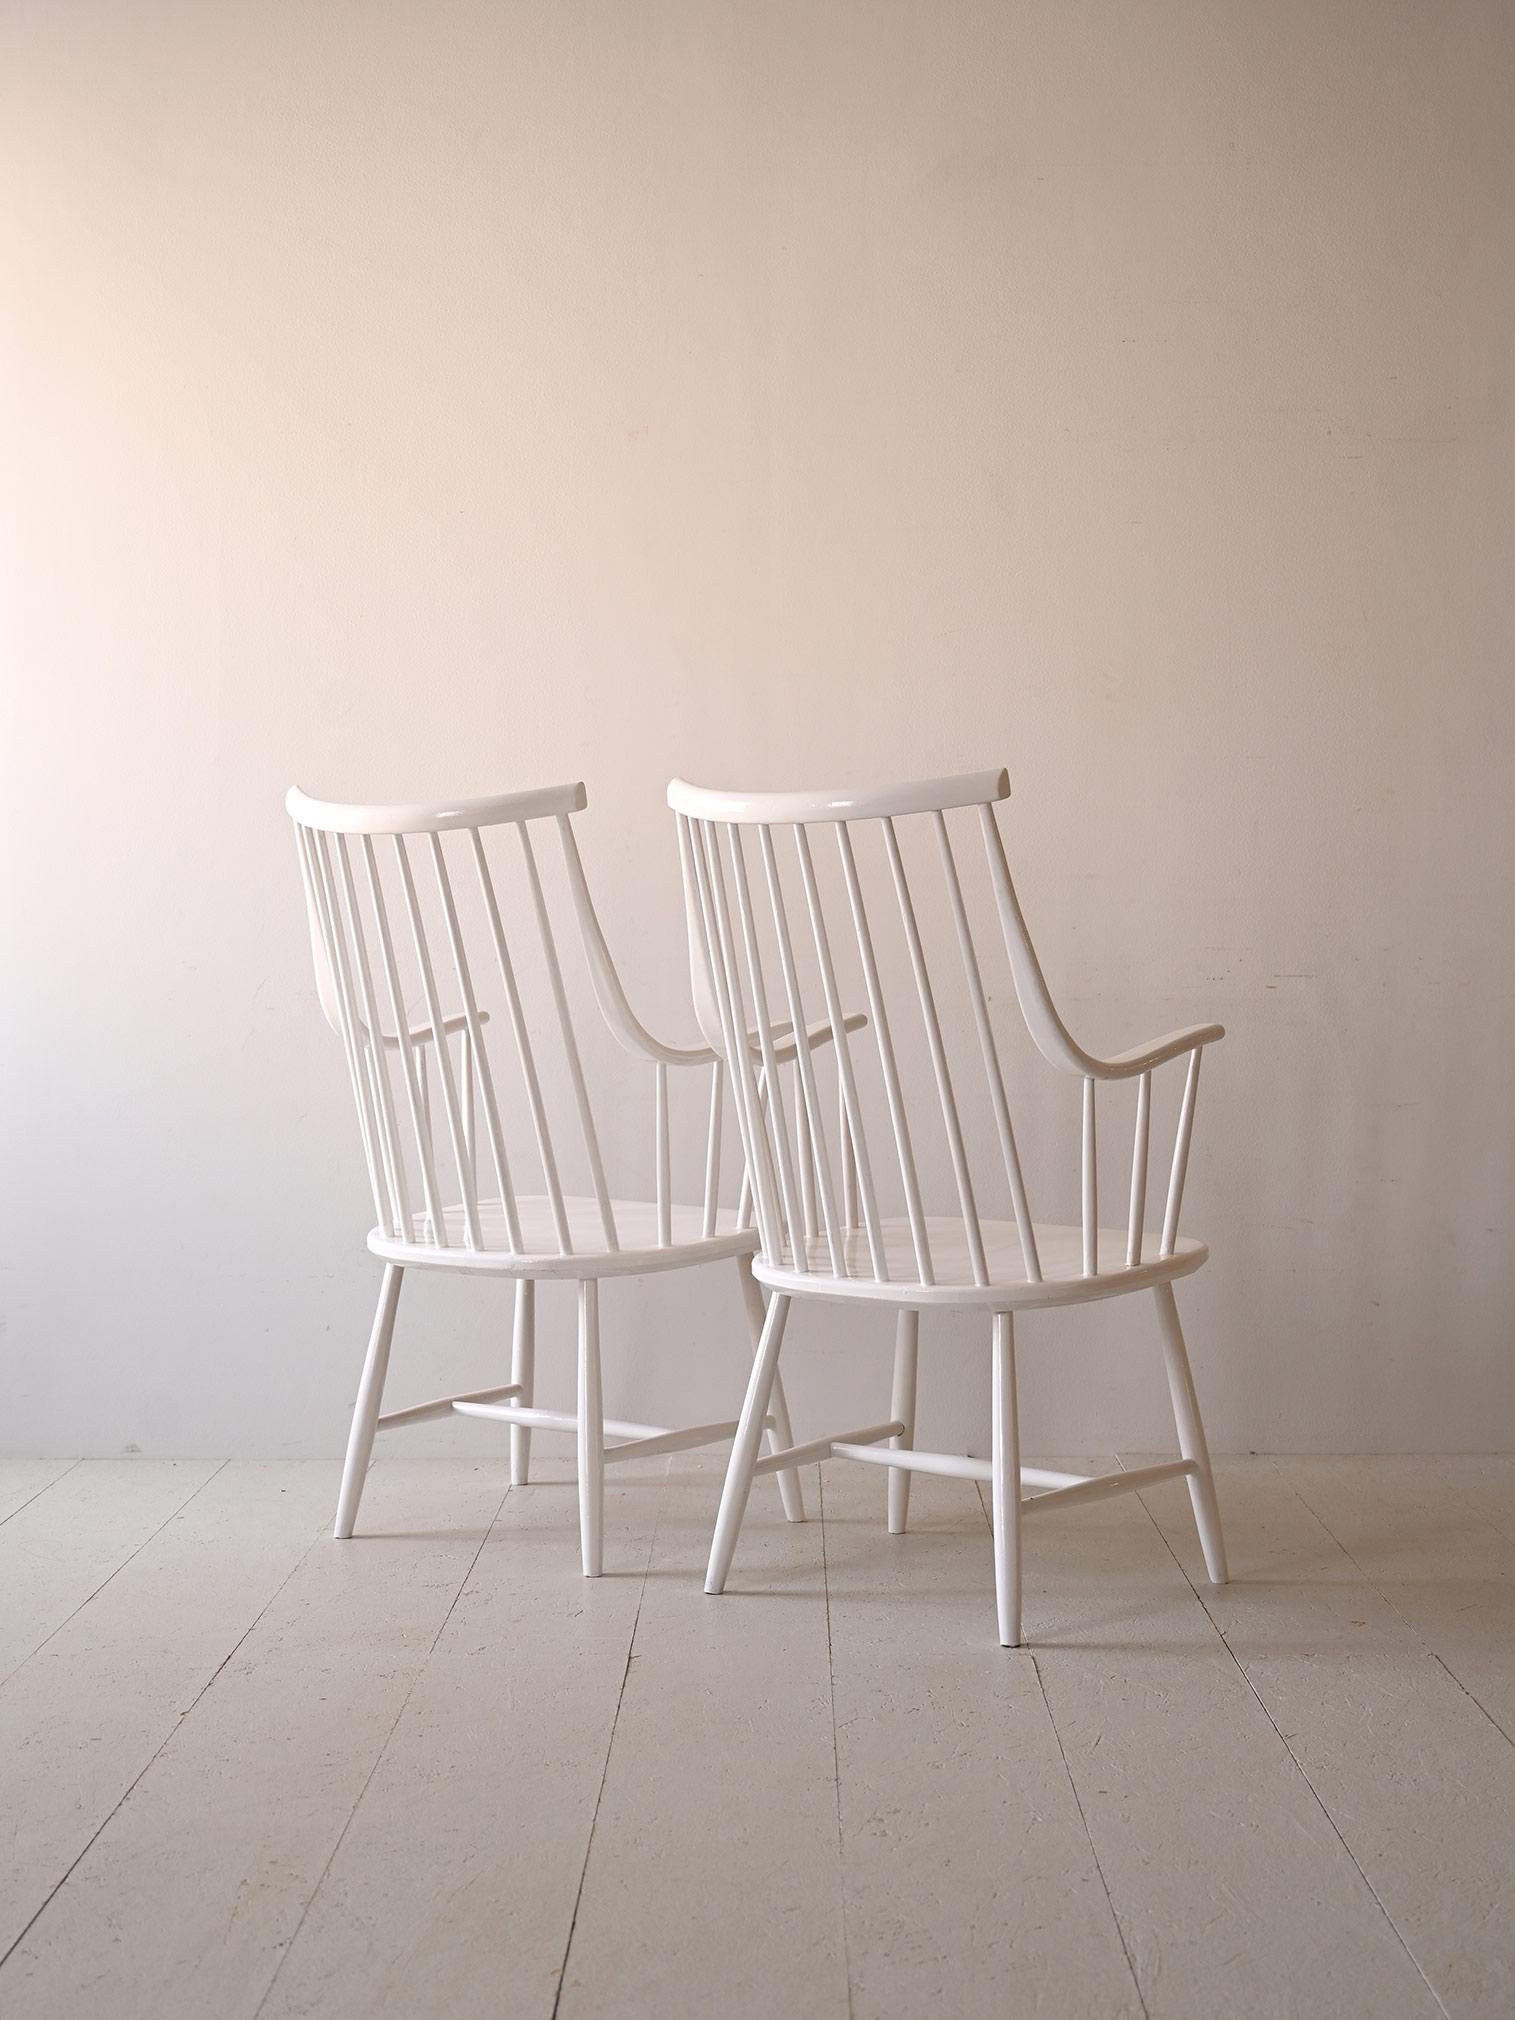 Swedish Pair of chairs designed by Lena Larsson model 